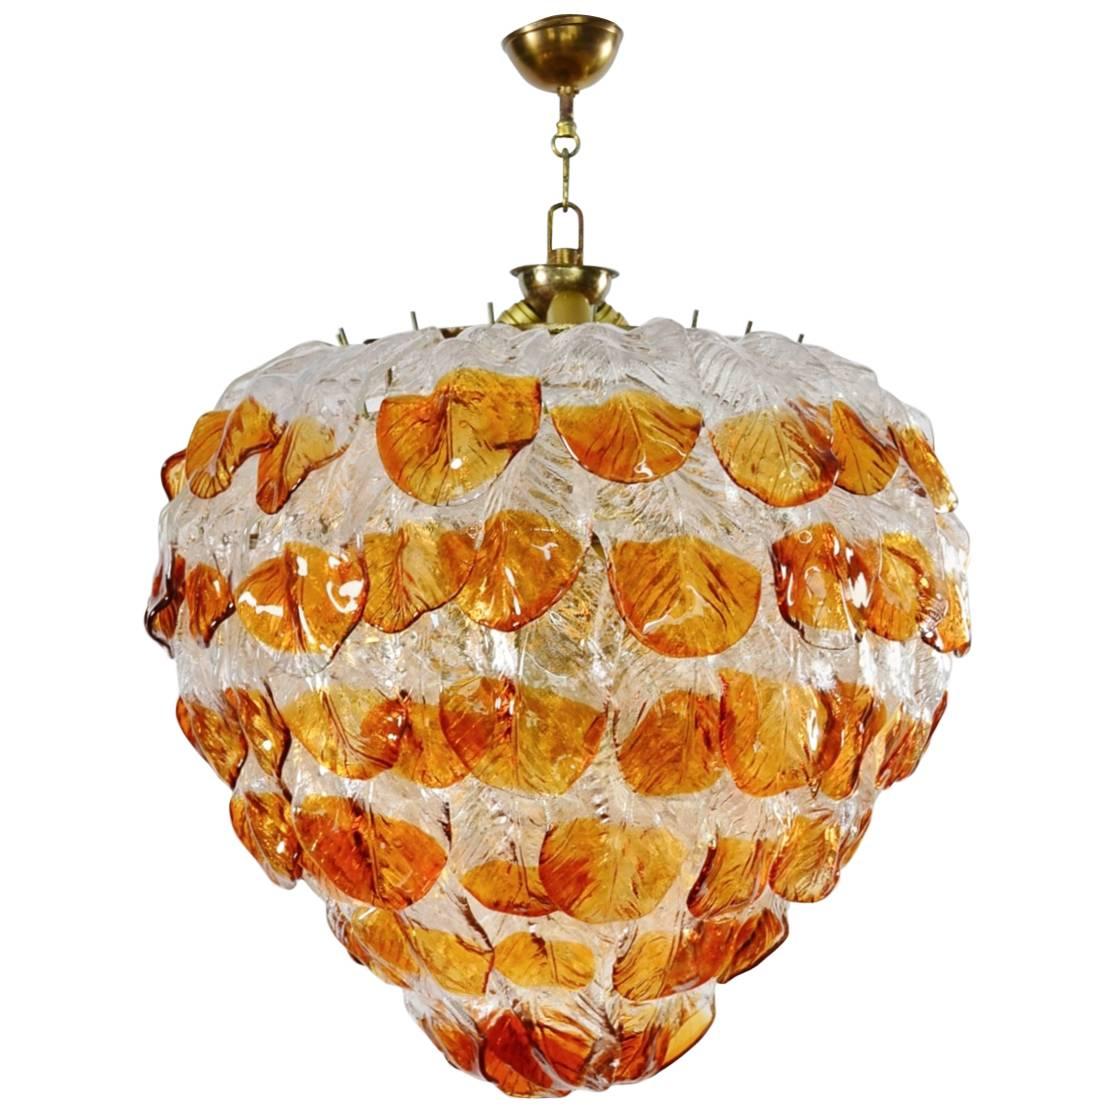 Italian Midcentury Murano Extra Large Chandelier with 99 Crystal Glass Leafs